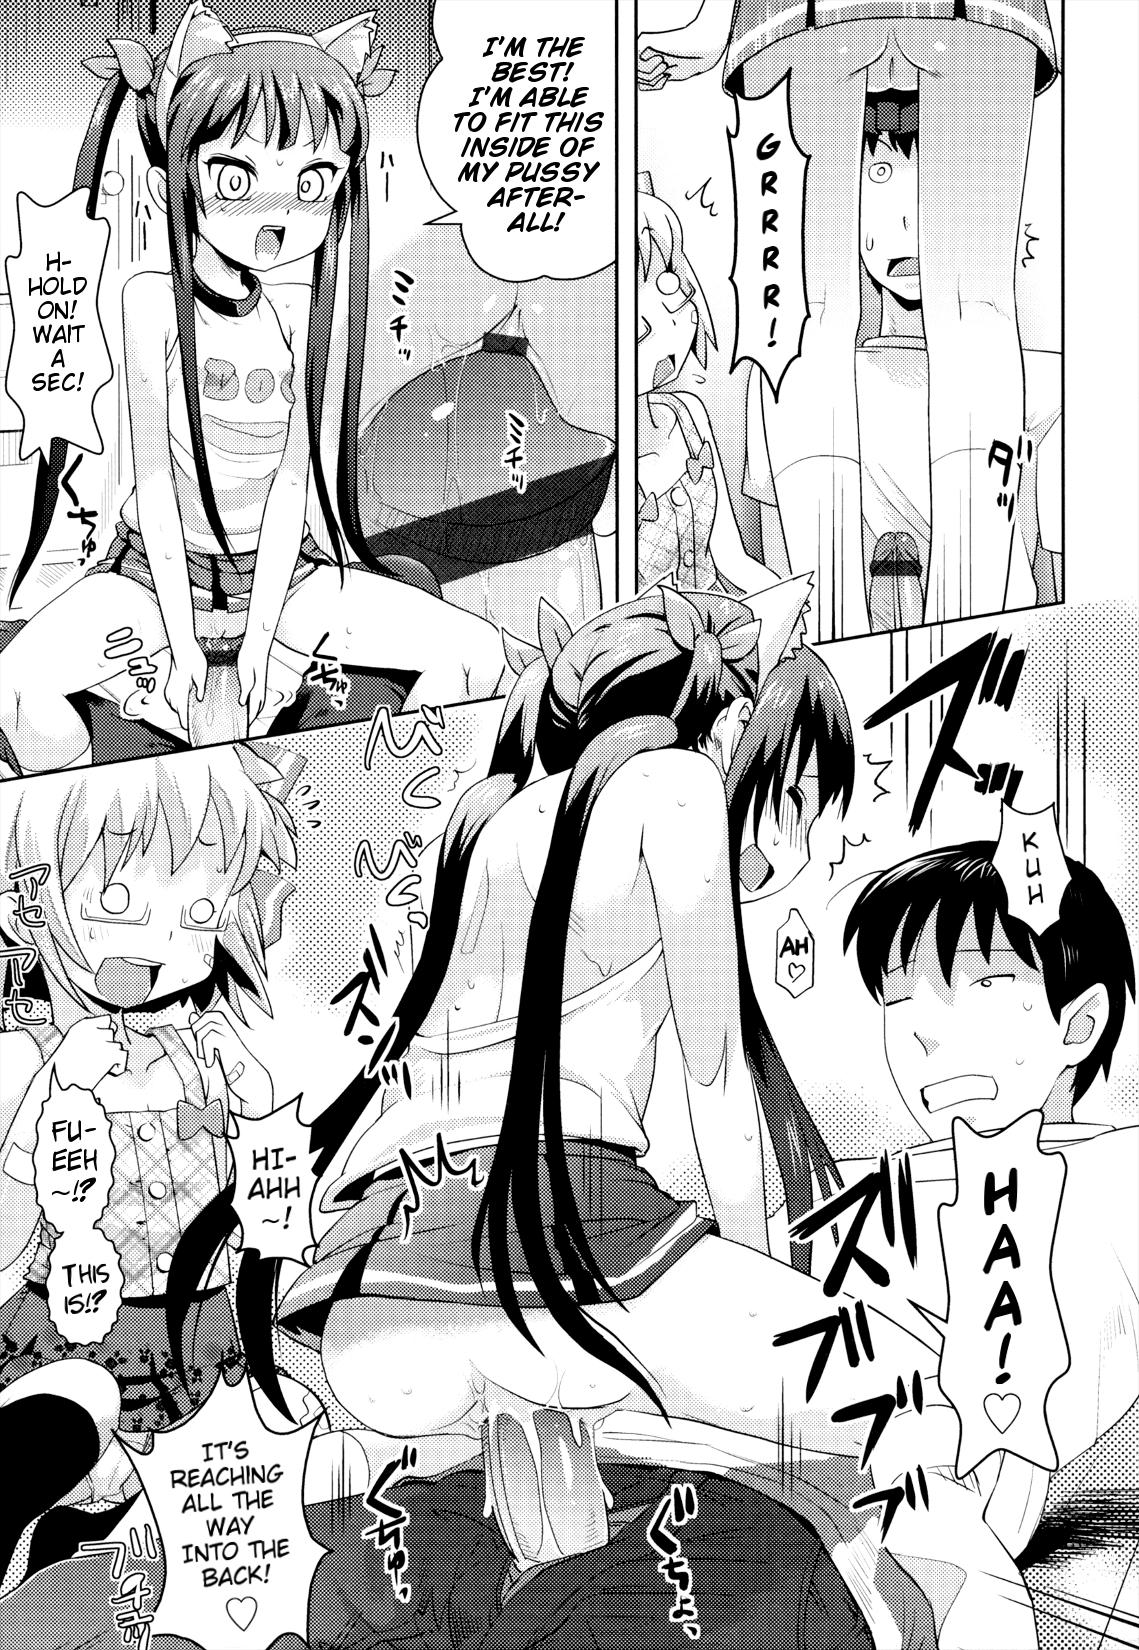 Spanking Gaw-Gaw! Imouto Security Hot Whores - Page 9